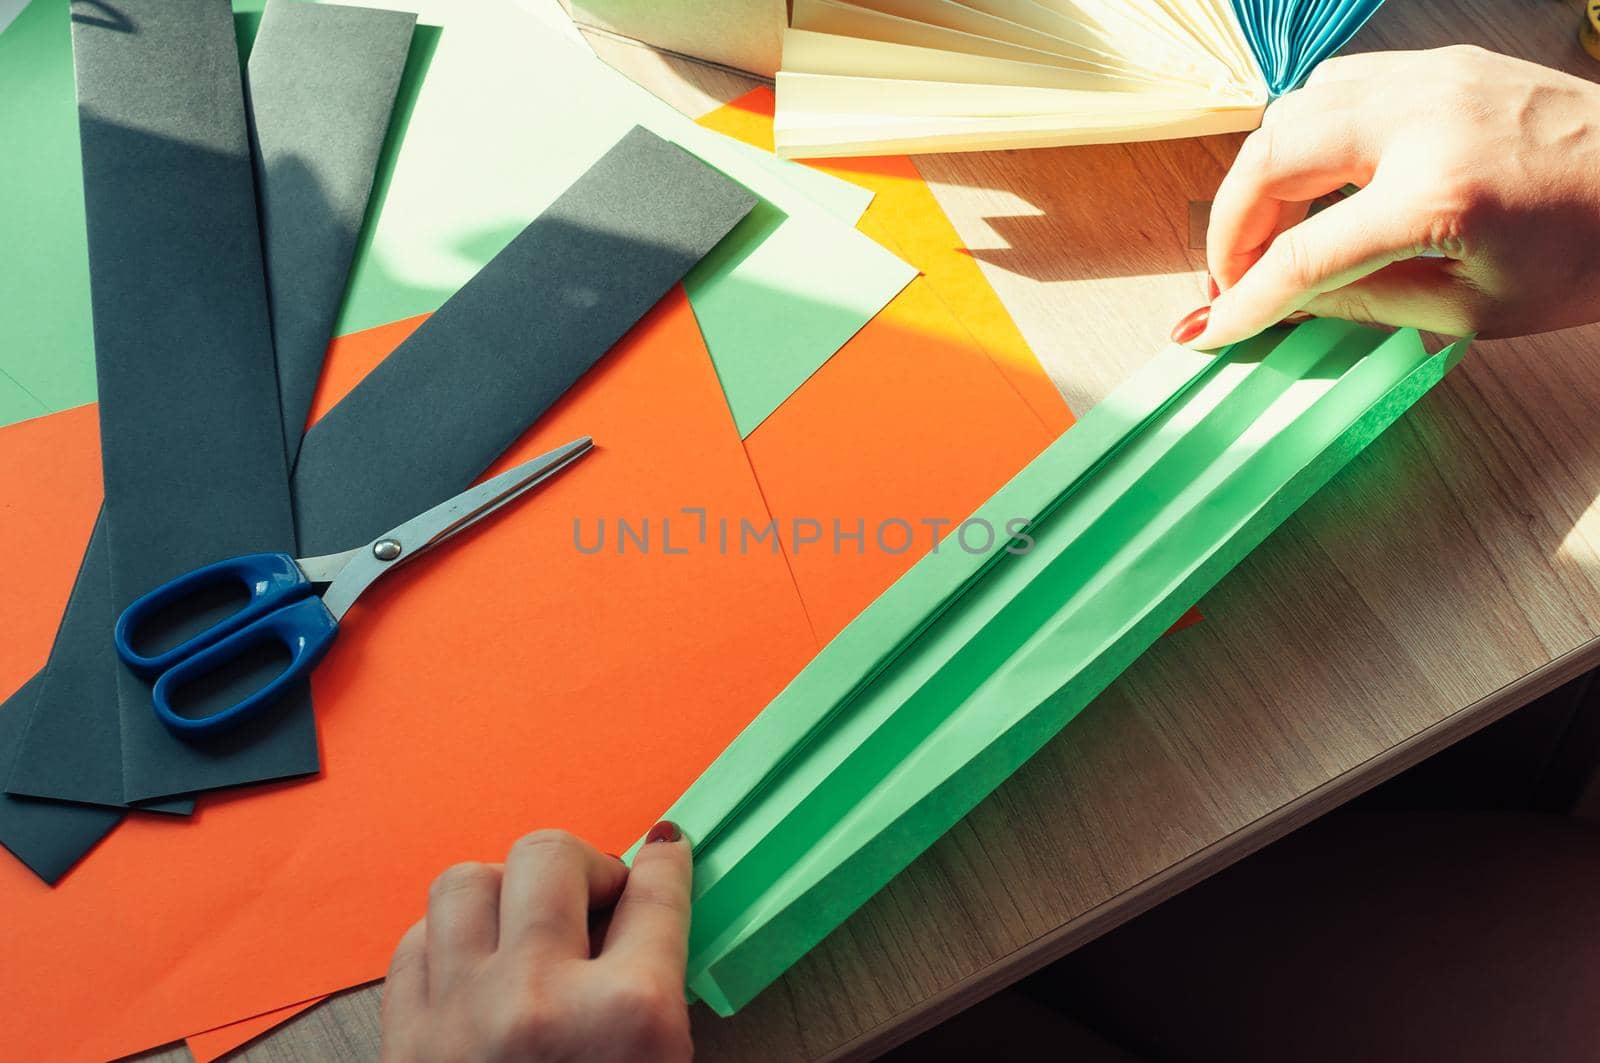 In the foreground, female hands are preparing blanks for an origami fan, sheets of colored paper, scissors on a wooden table. Several blanks for a fan. Template for design, advertising or text.